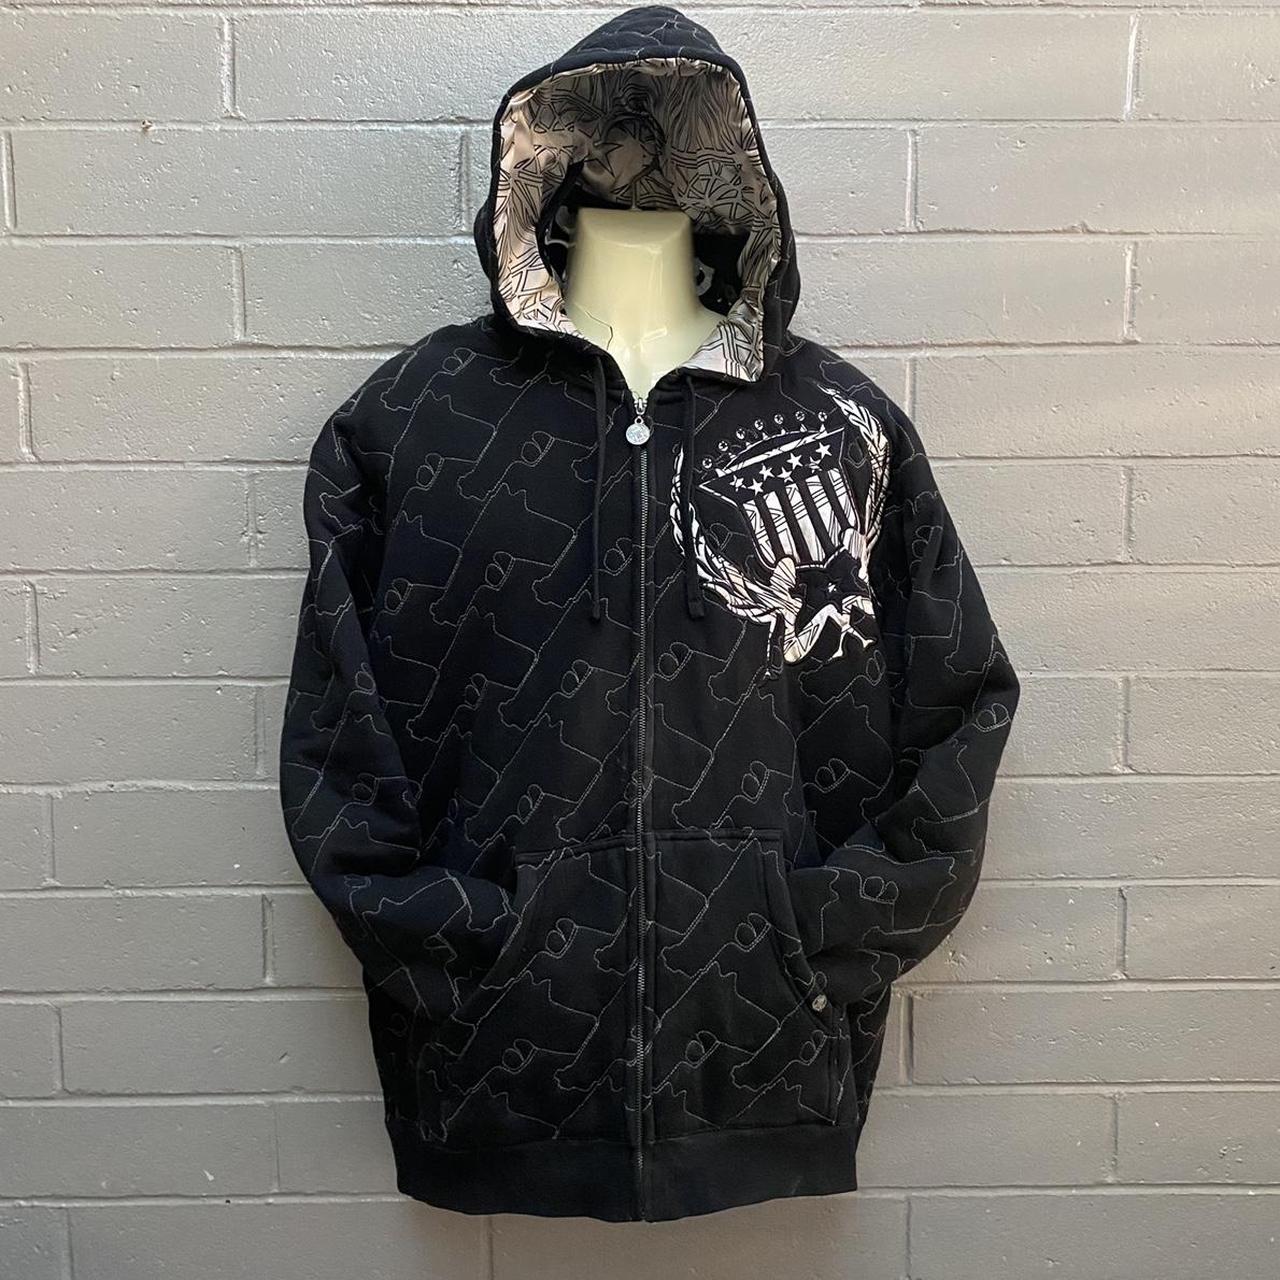 Silver Star Casting Company Lined Zip Up Hooded... - Depop